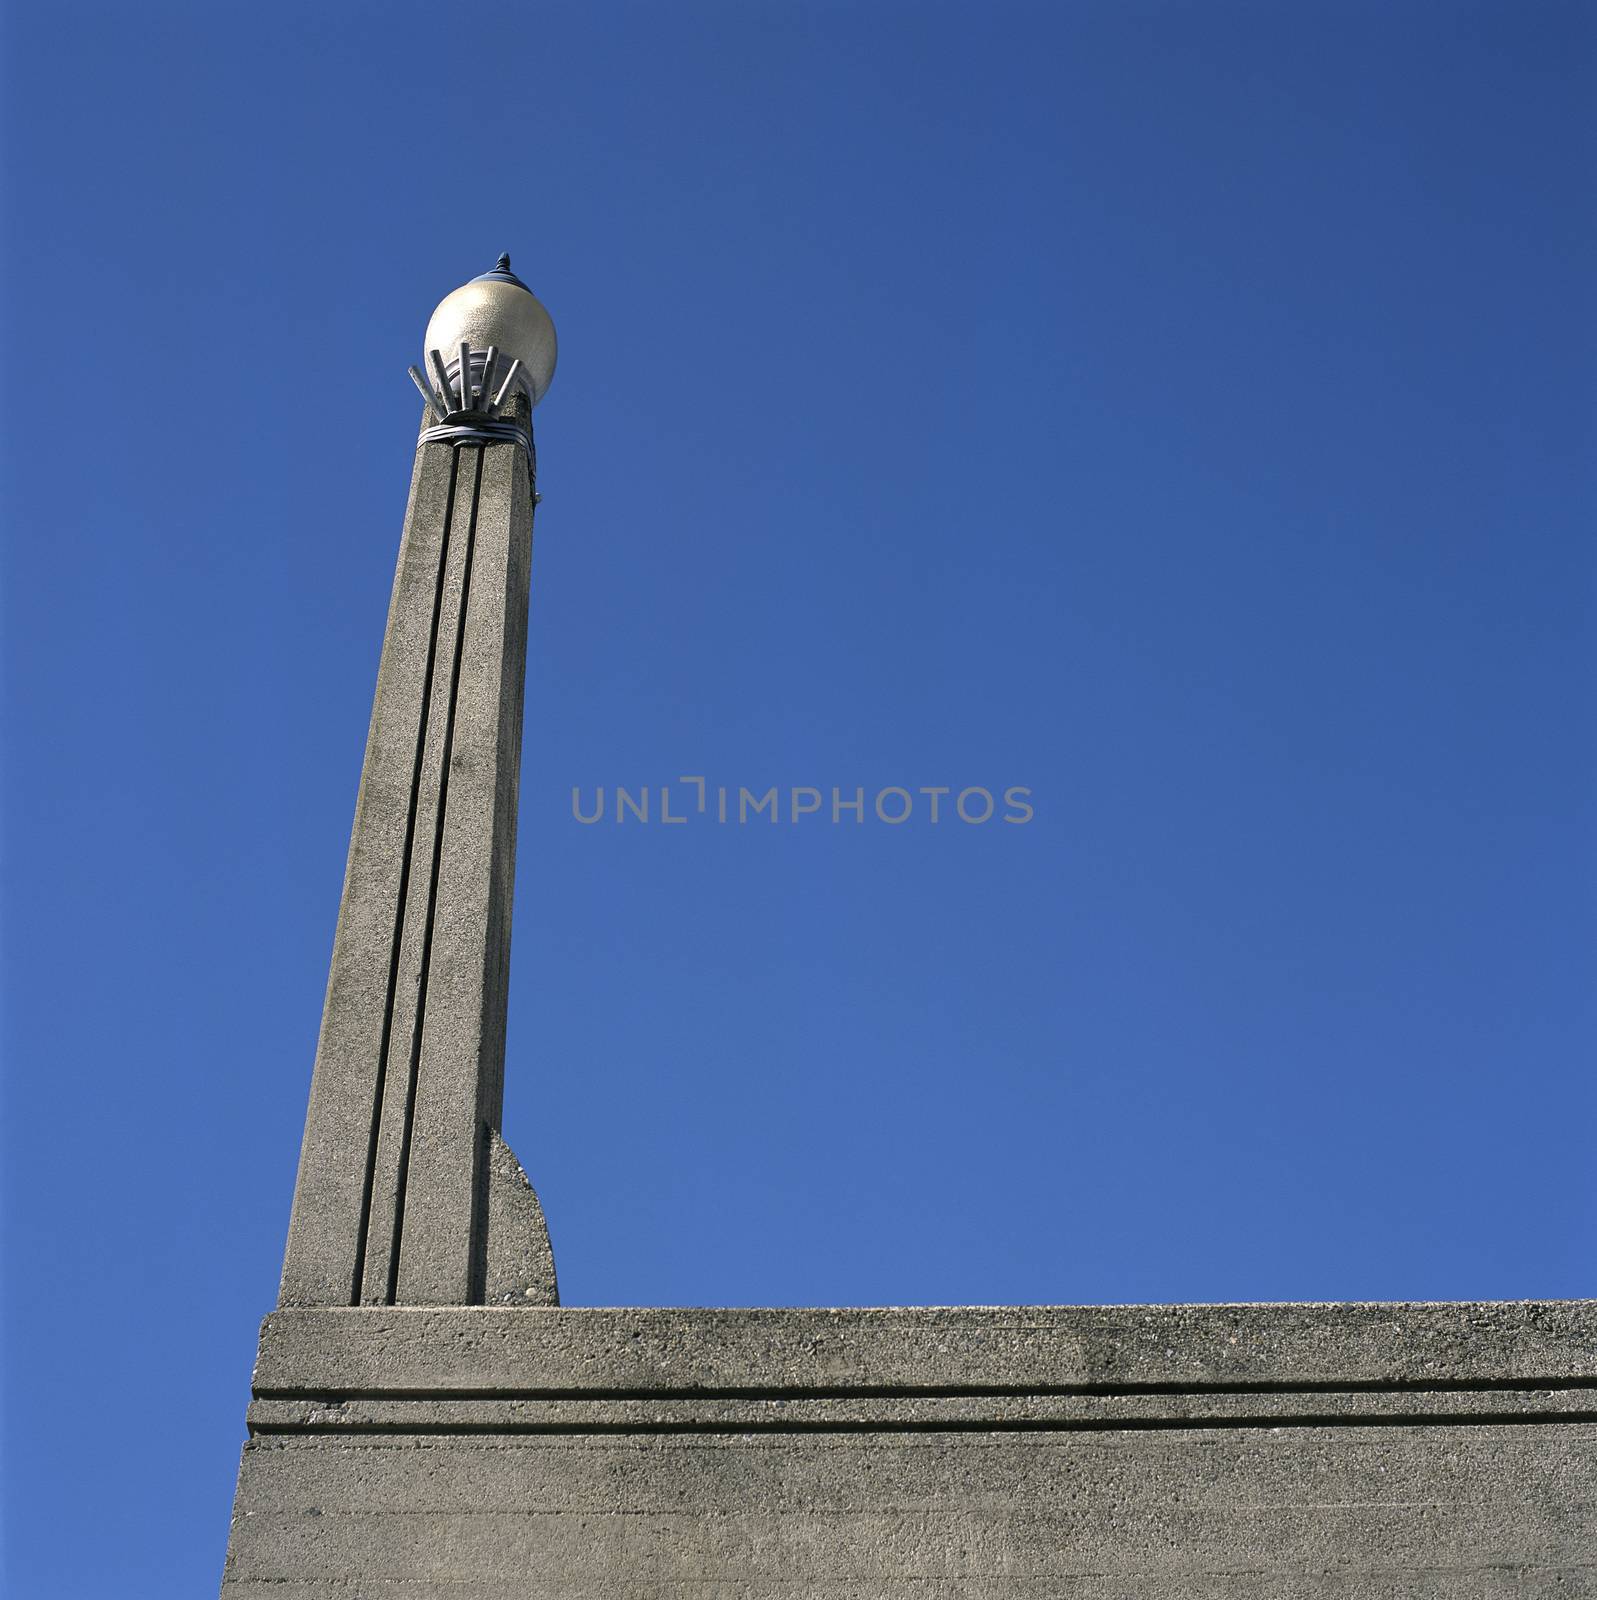 Lampost and blue sky